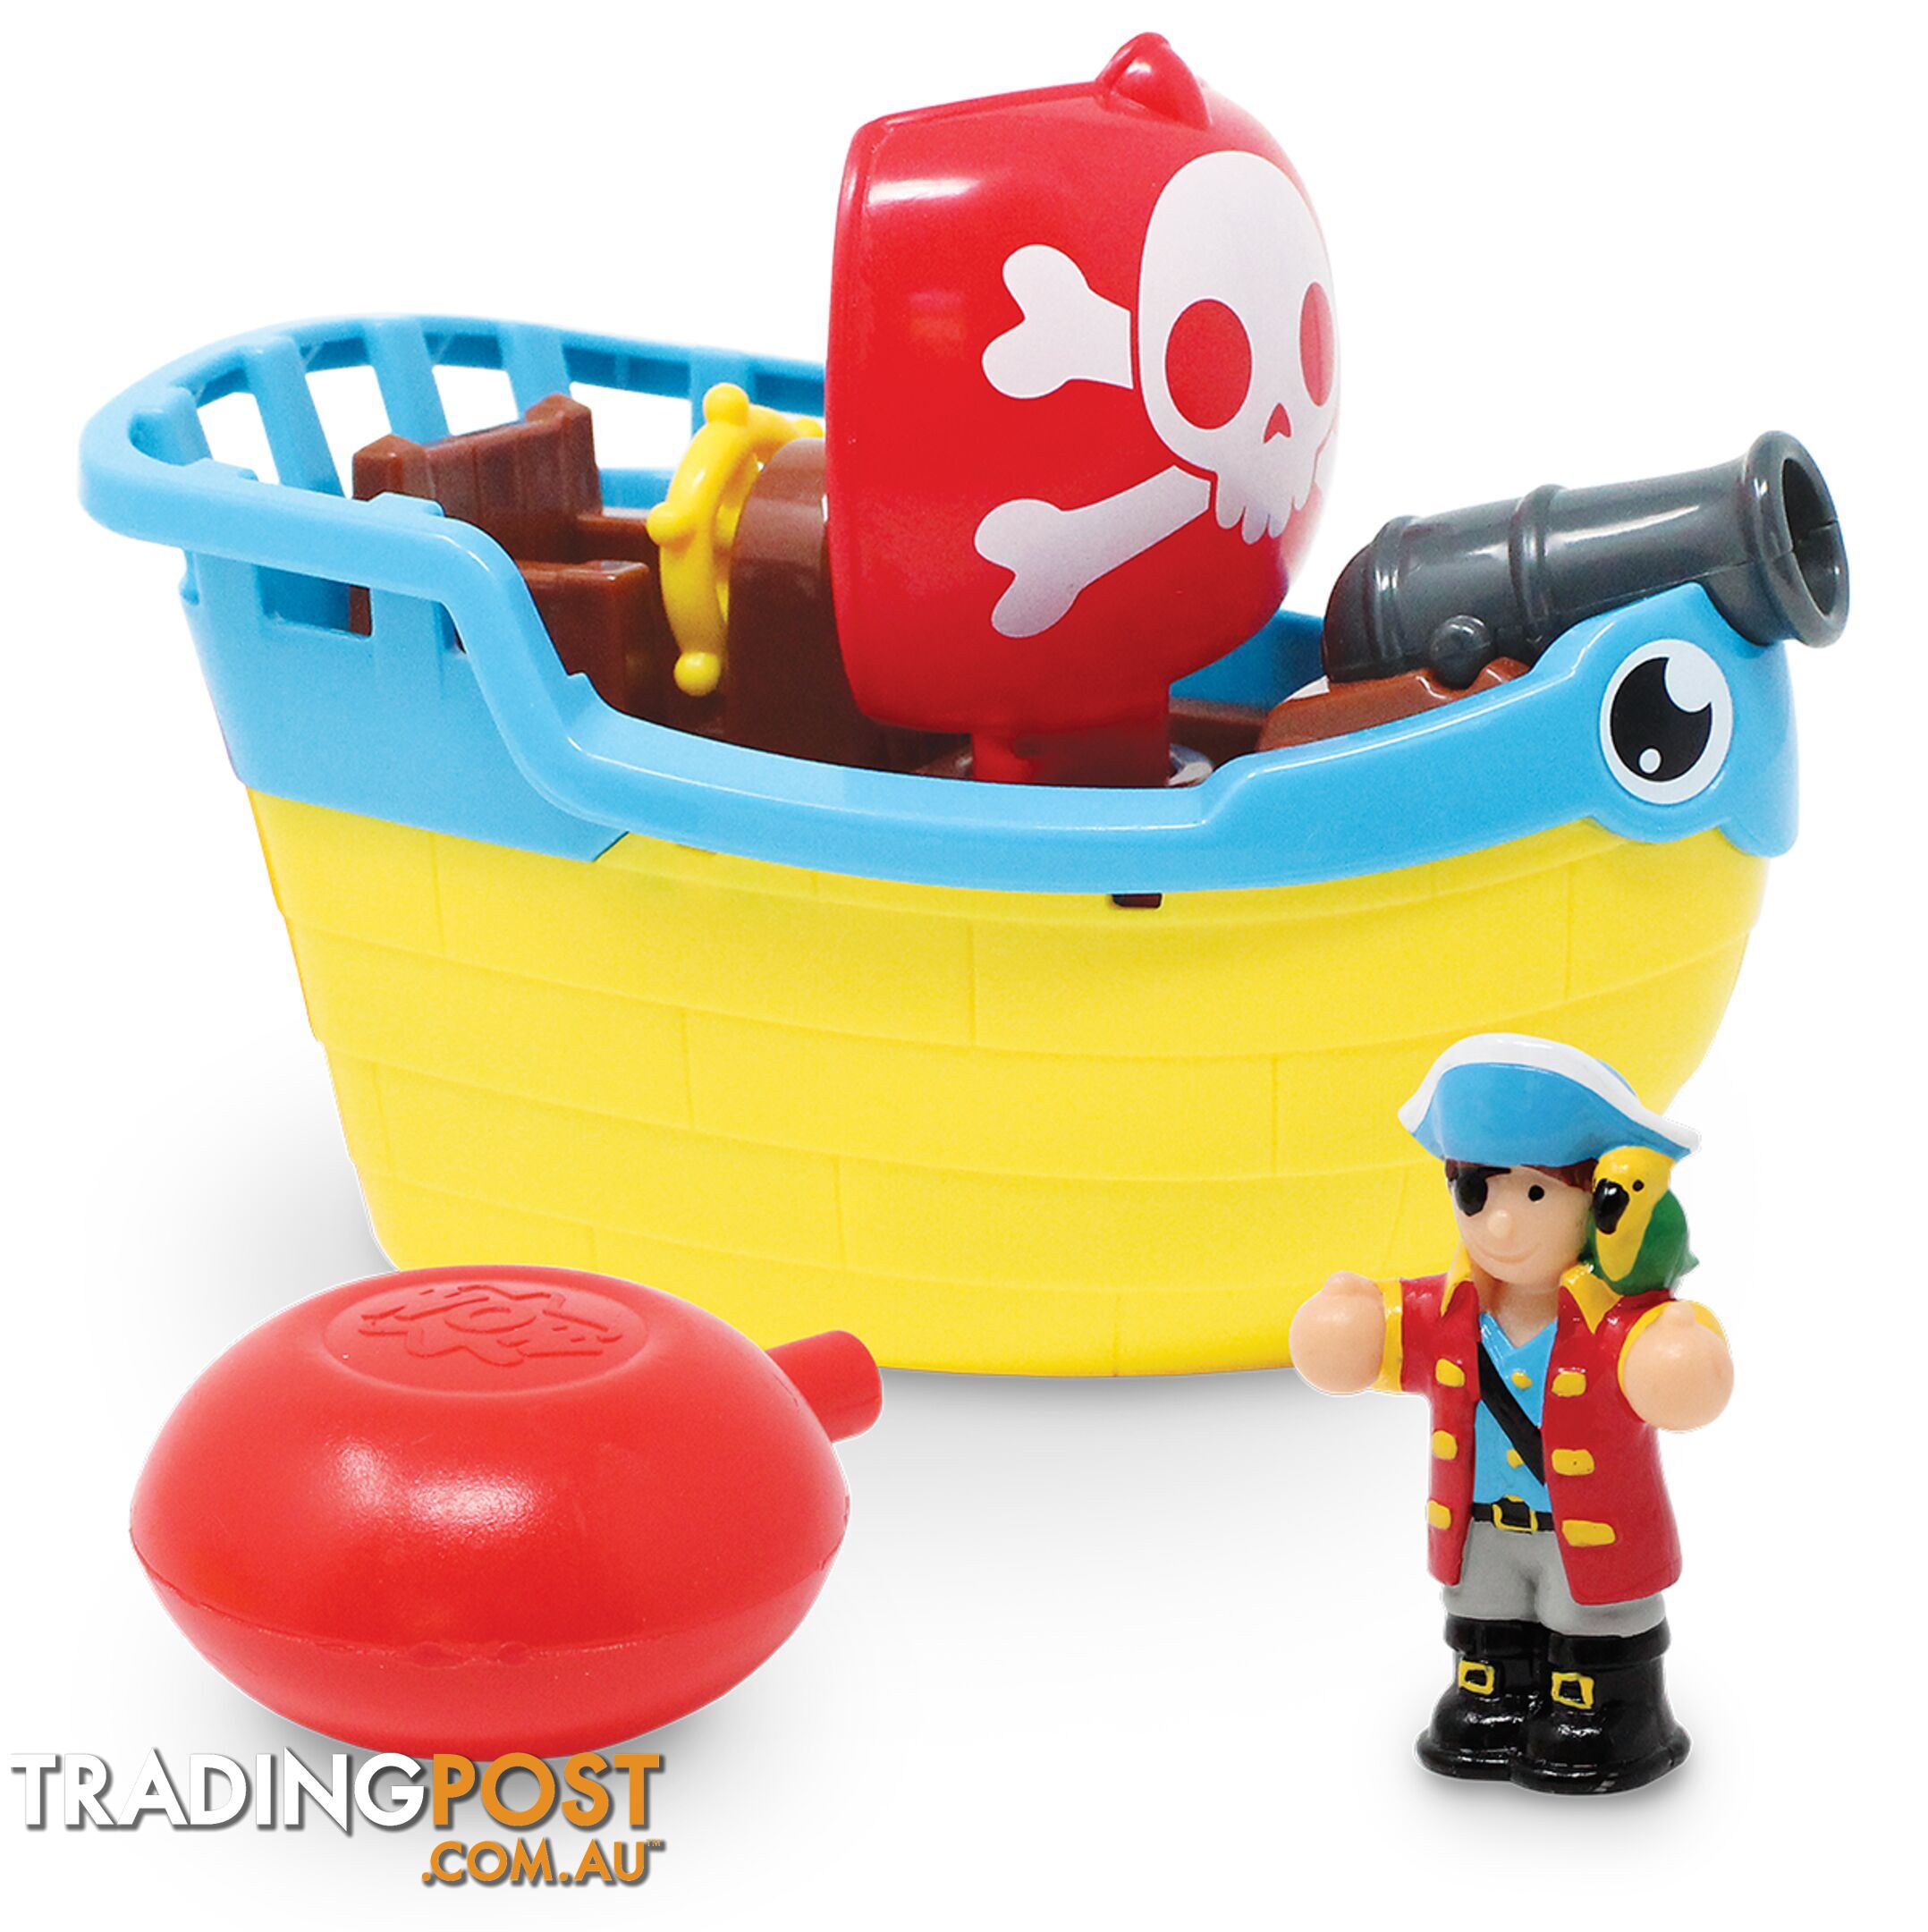 Pip the Pirate Ship (Bath Toy) - WOW Toys - 5033491103481